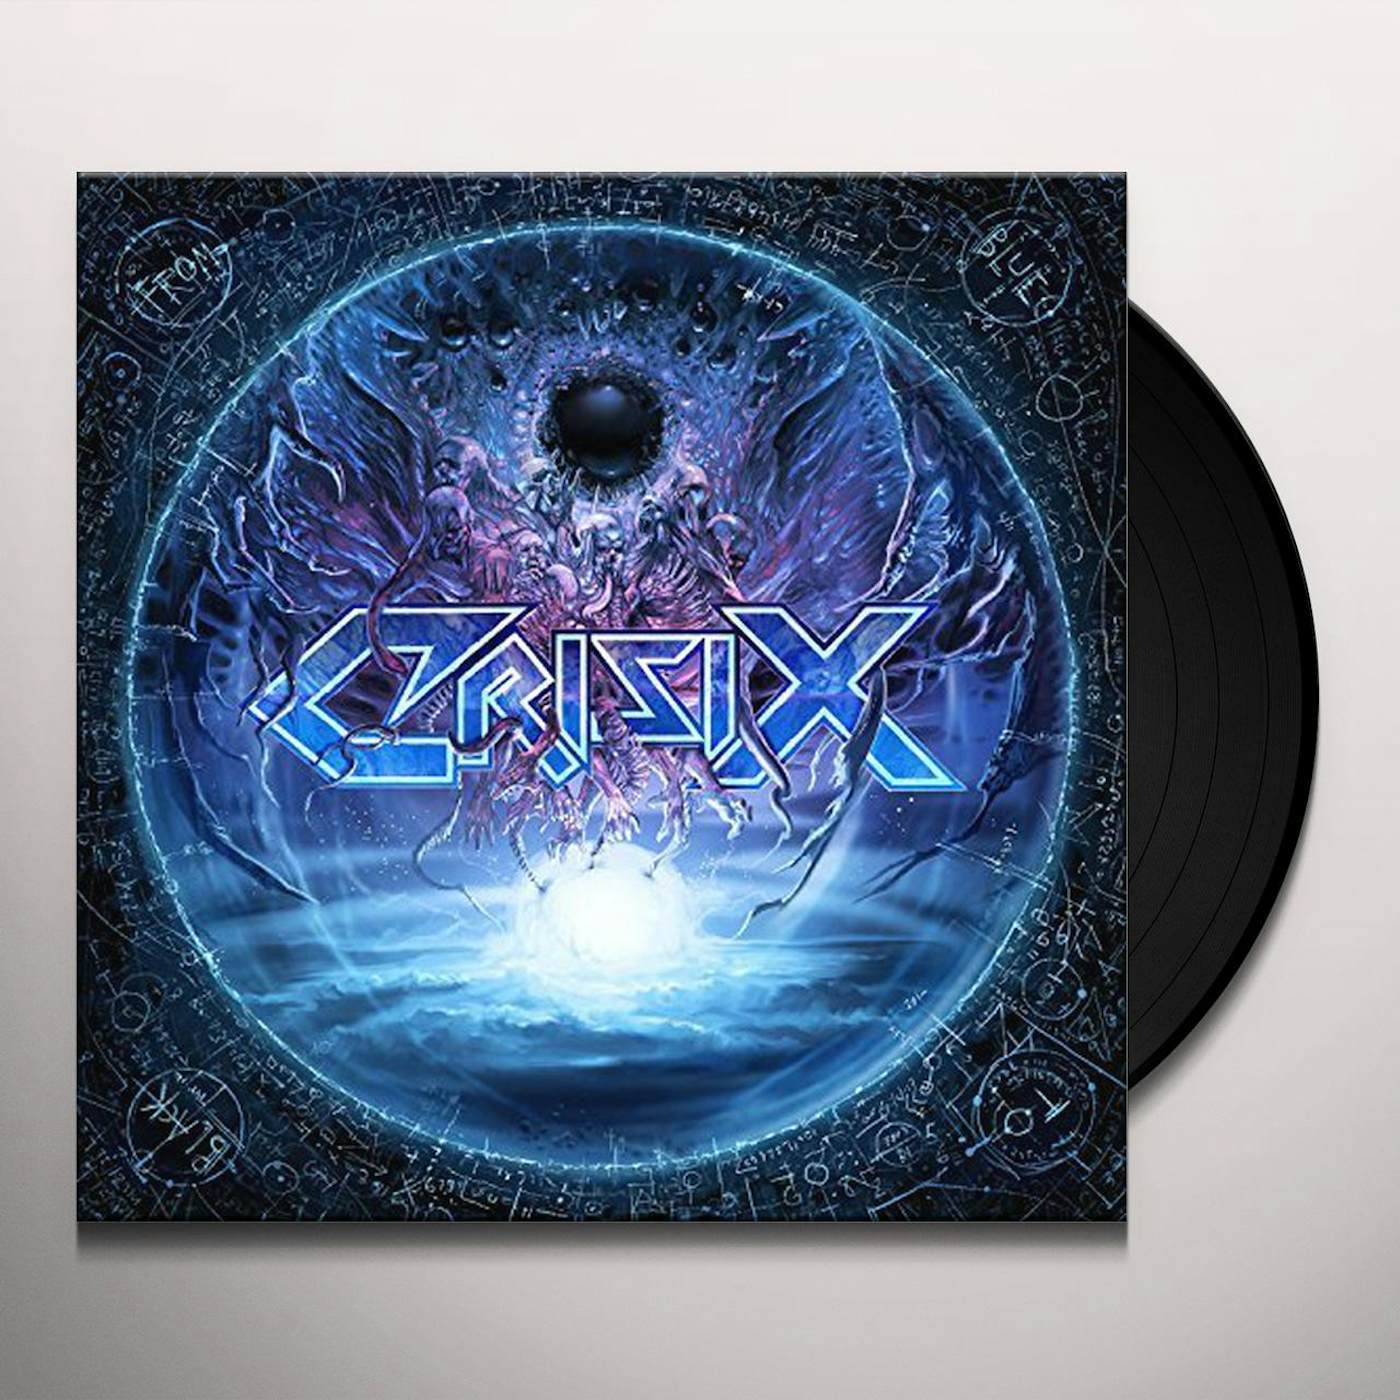 Crisix From Blue To Black Vinyl Record